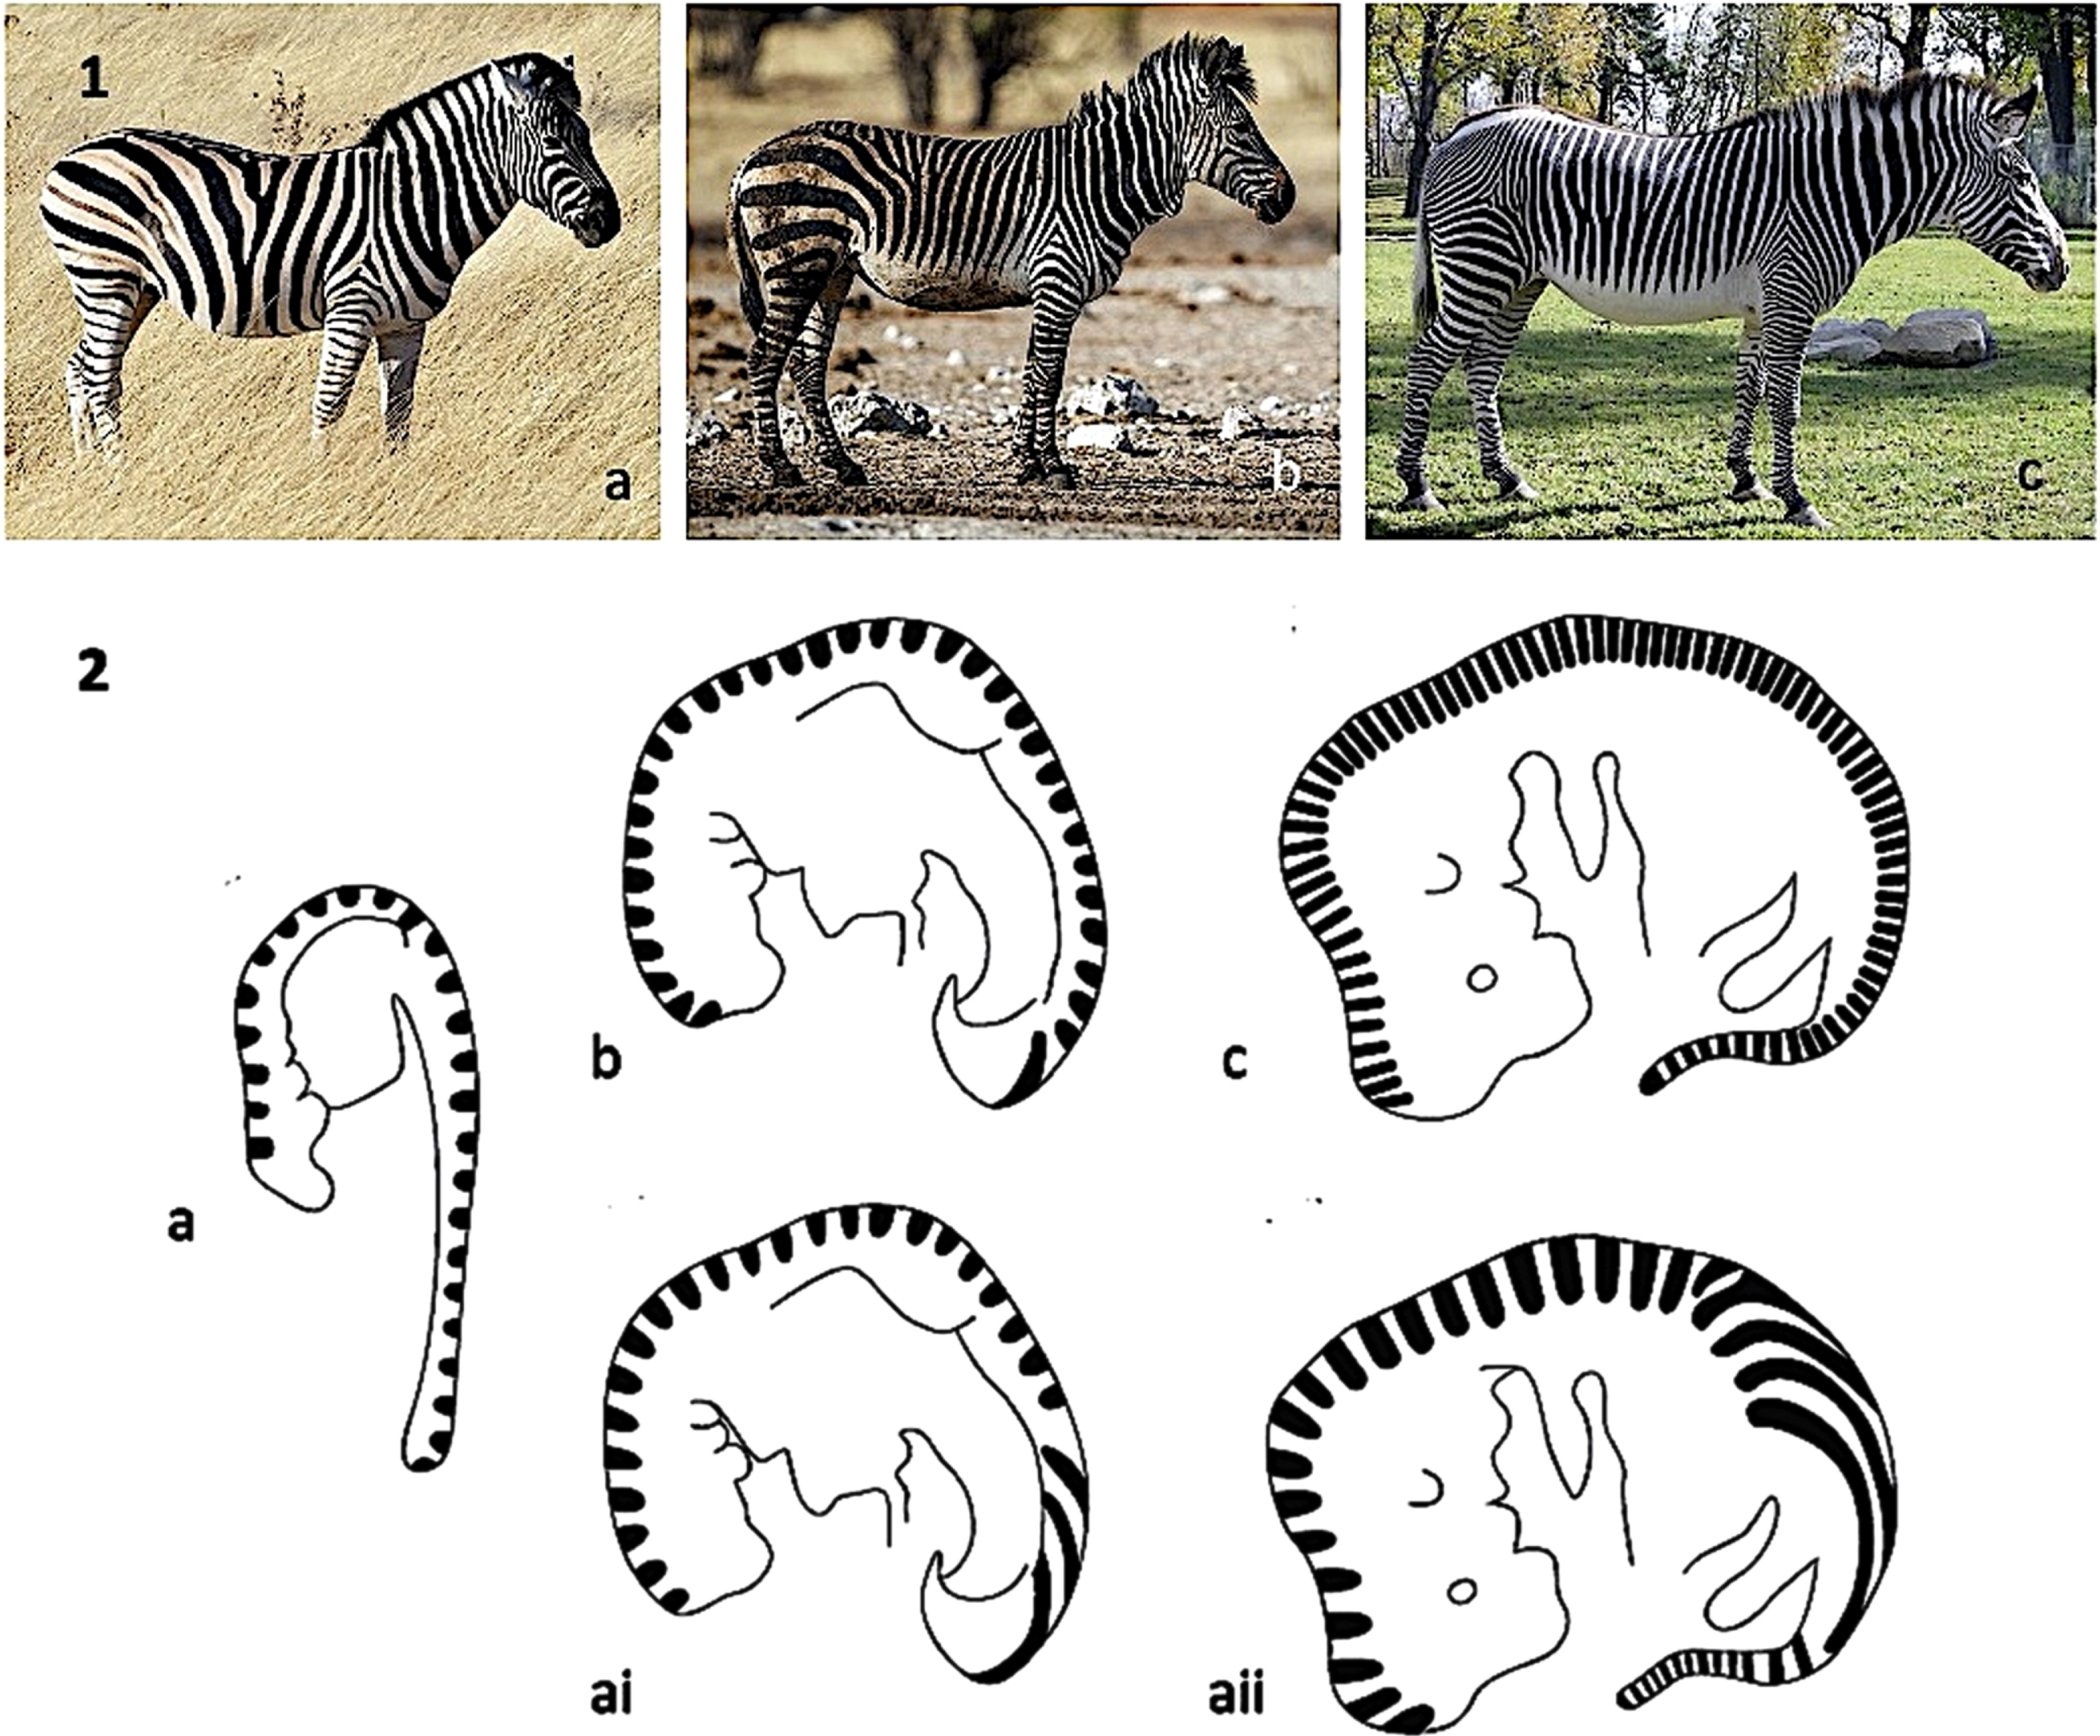 The effect of timing on the initiation of zebra striping patterns. 1: Three zebra species. a: Equus quagga burchelli has ∼26 stripes. b; E. zebra as ∼50 stripes. c: E. grevyi has ∼75 stripes. (a: Courtesy of Gusjr; published under a CC Attribution generic 2.0 license. b: Courtesy of Yathin S. Krishnappa; published under a CC Attribution share-alike 4.0 international license. c: Courtesy of Thivier; published under a CC Attribution share-alike 3.0 unported license.) 2a,b c: 3, 3.5 and 5 week horse embryos on which have been drawn stripes of 200um separation such as can be generated by reaction-diffusion kinetics. ai and aii: the effect of normal embryonic growth on stripes laid down at 3 weeks at 3,5 and 5 weeks. (From [51] with permission from John Wiley and sons).